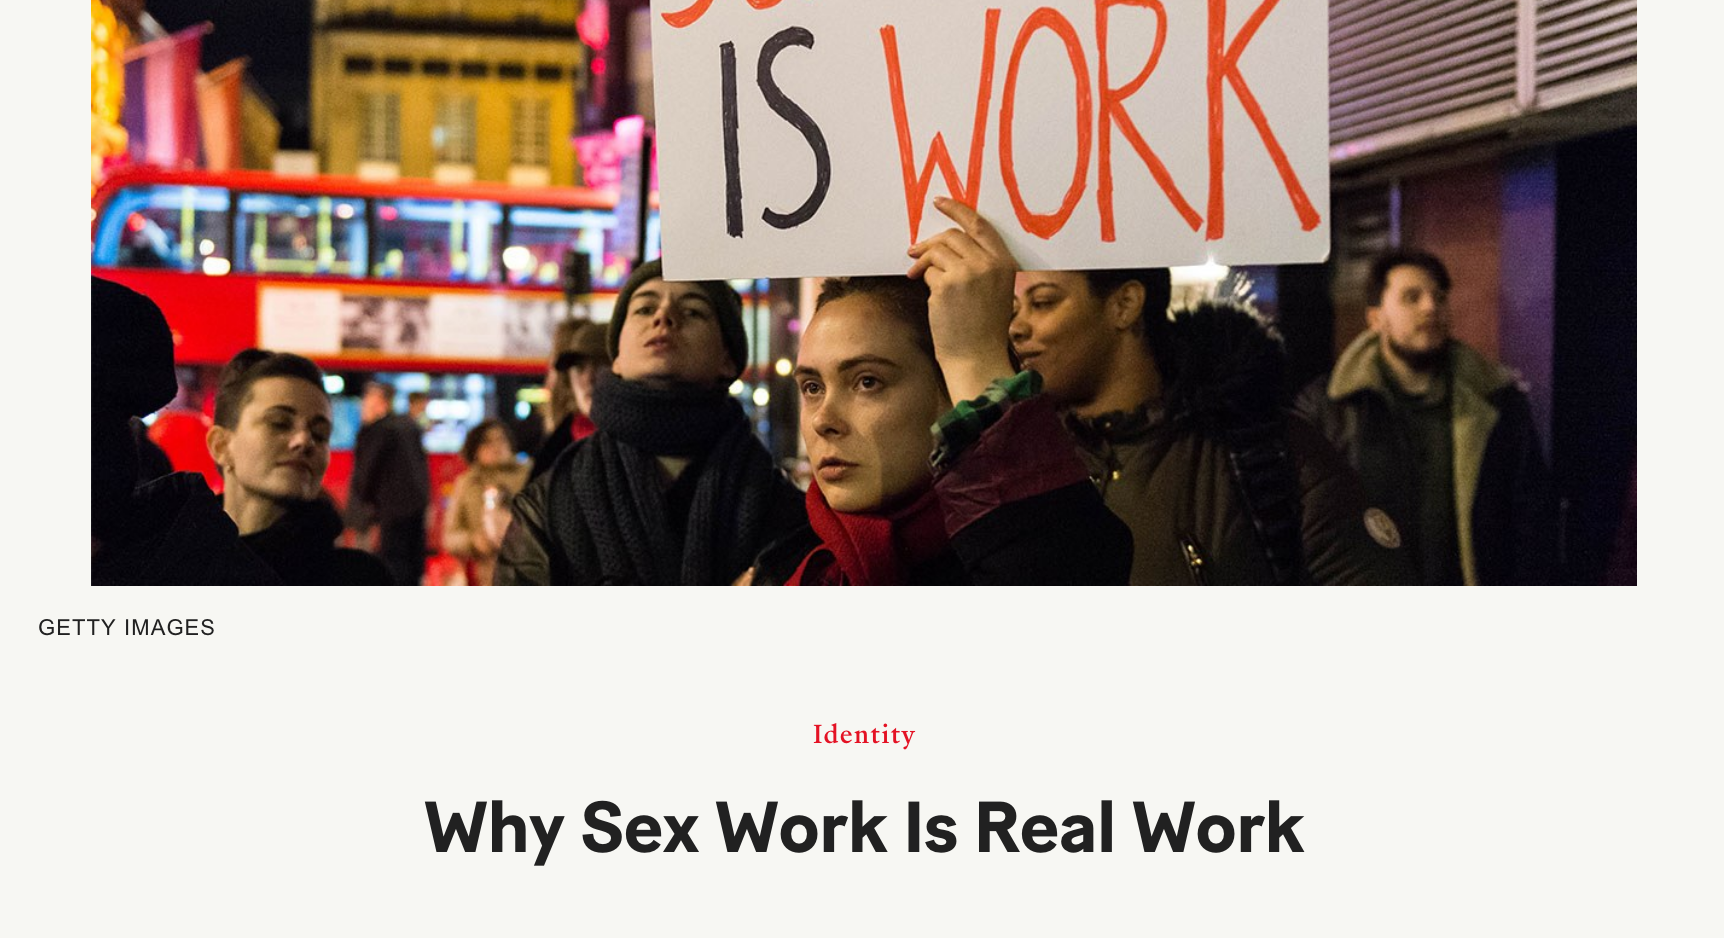 Screenshot of headline portion of Teen Vogue's "Why Sex Work is Real Work" article